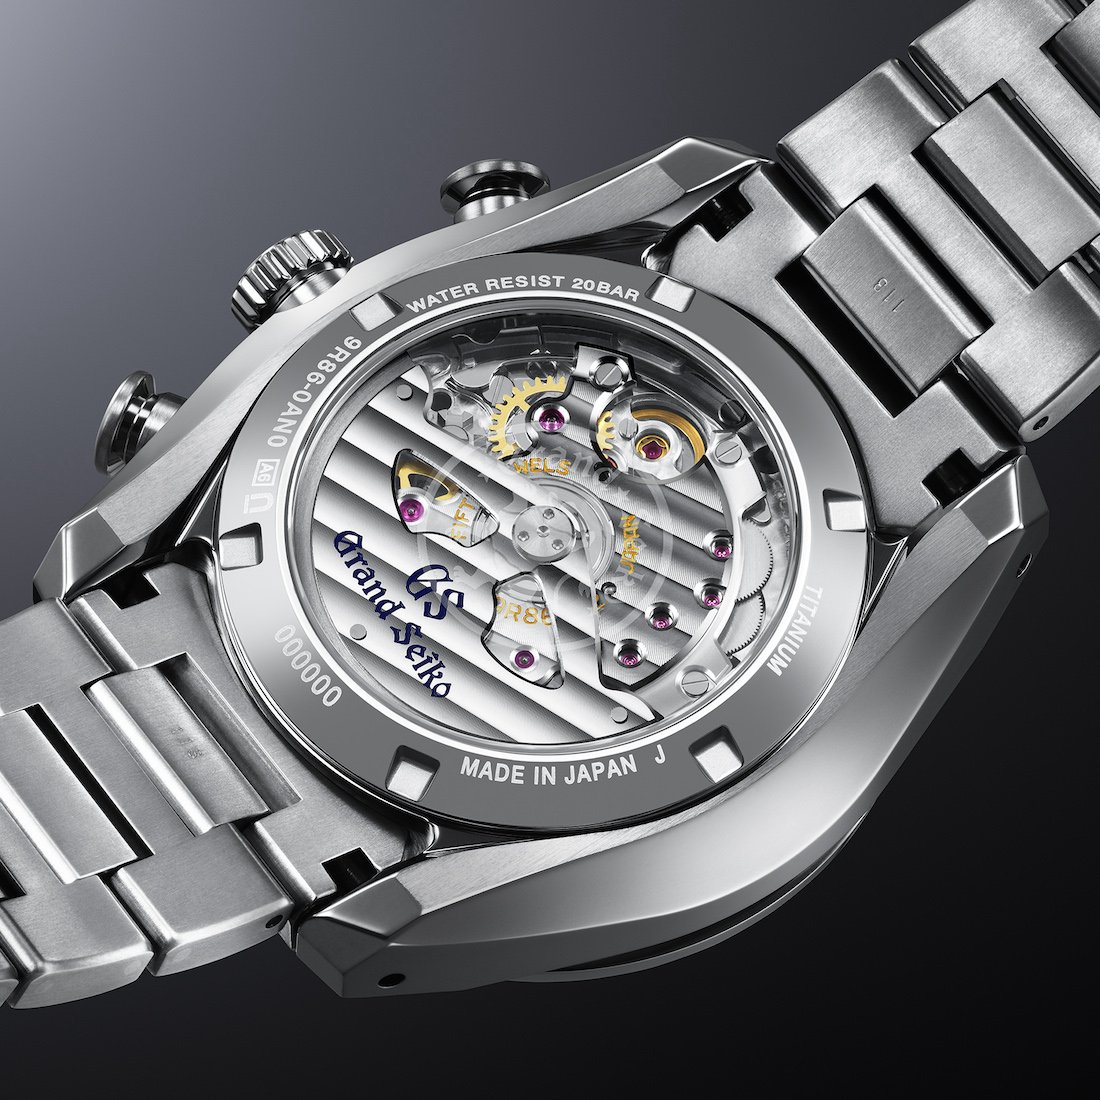 Introducing: Grand Seiko Spring Drive GMT Chronograph SBGC253. Inspired by  the Grand Seiko Lion. — WATCH COLLECTING LIFESTYLE